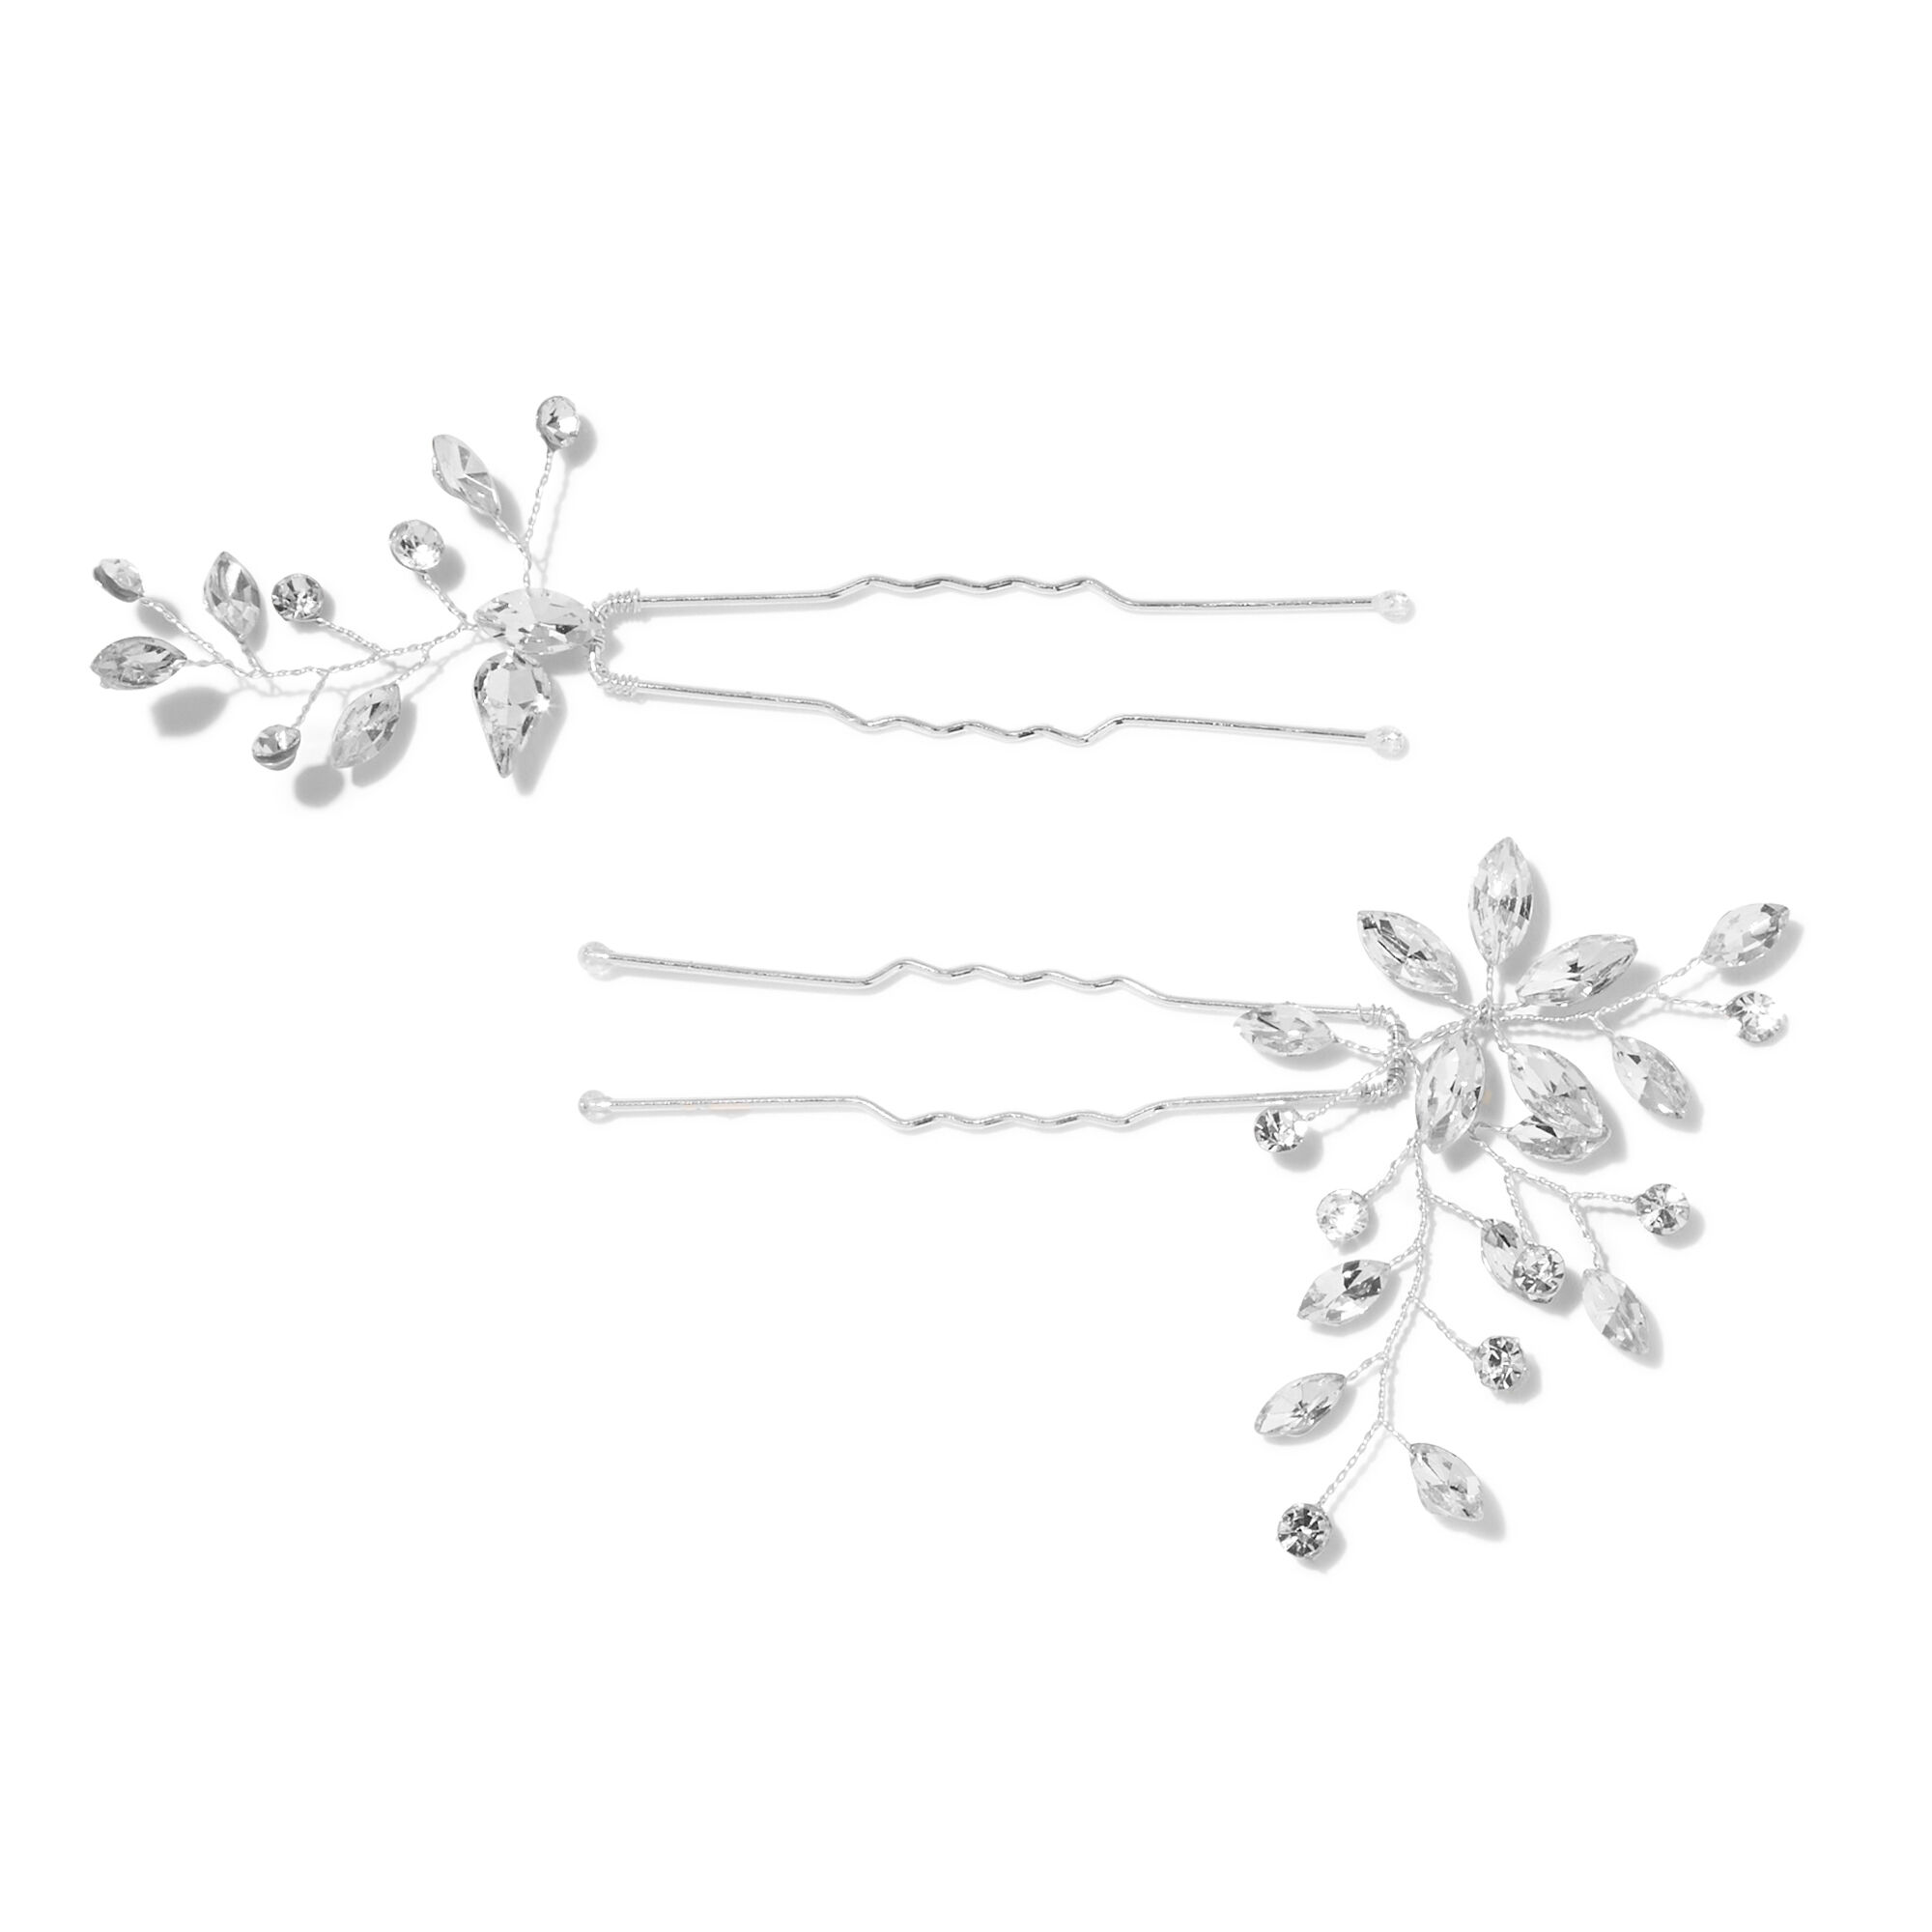 View Claires Crystal Spray Floral Hair Pins 2 Pack Silver information